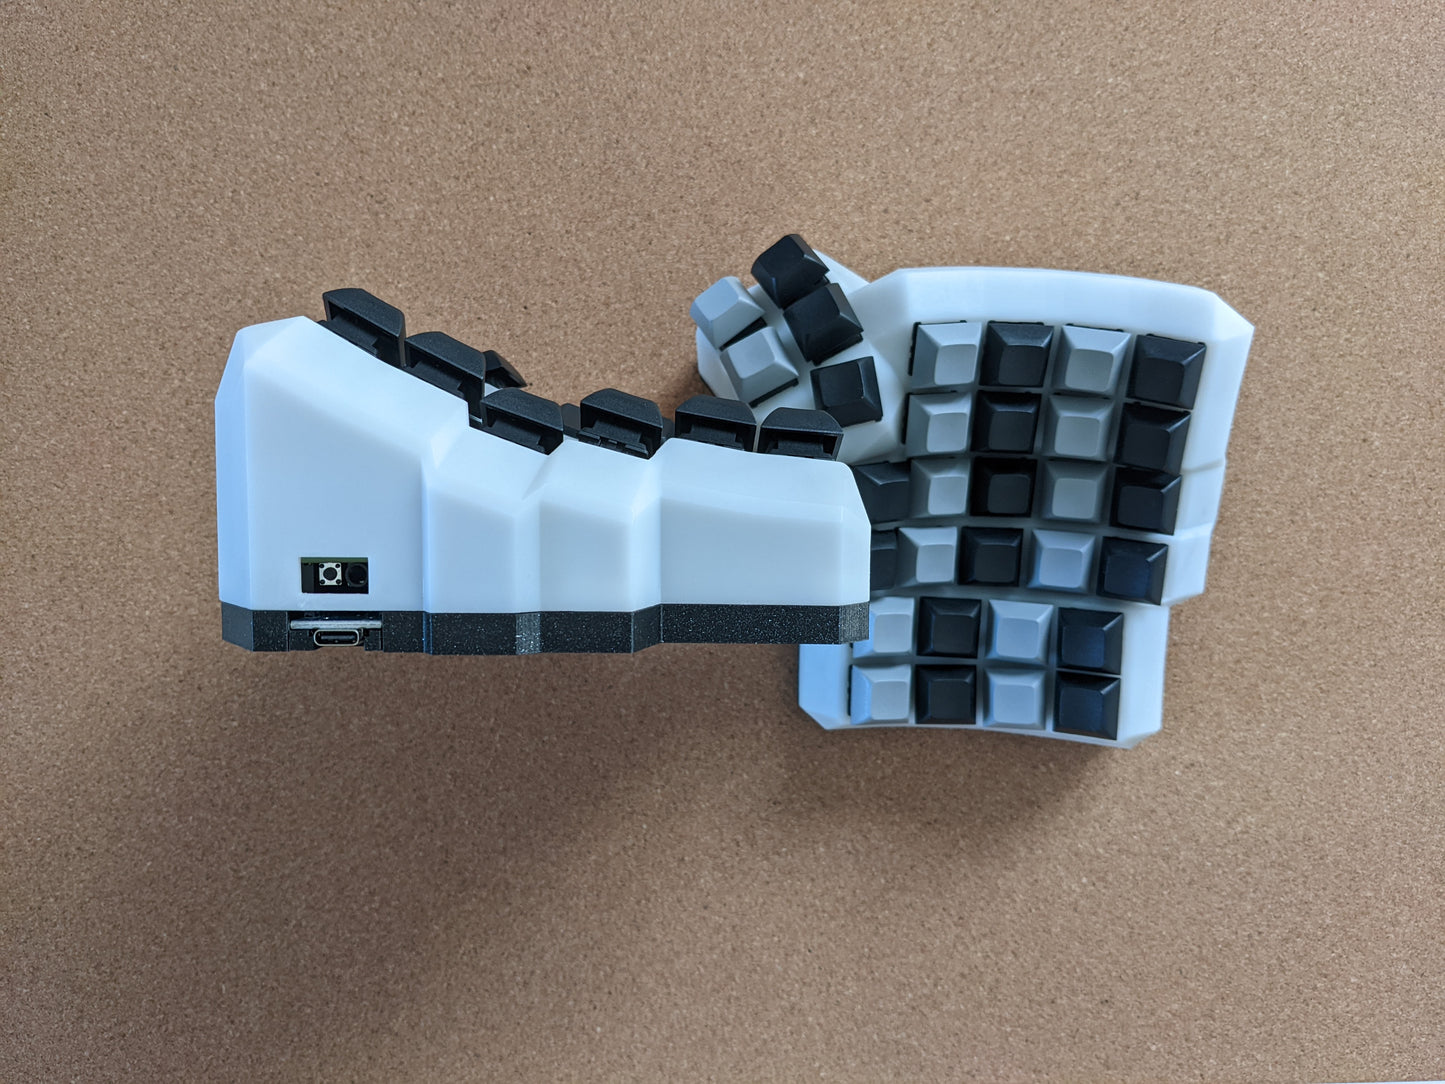 taikohub ergonomic dactyl manuform keyboard in white resin in size medium with TRS port and USB-C port